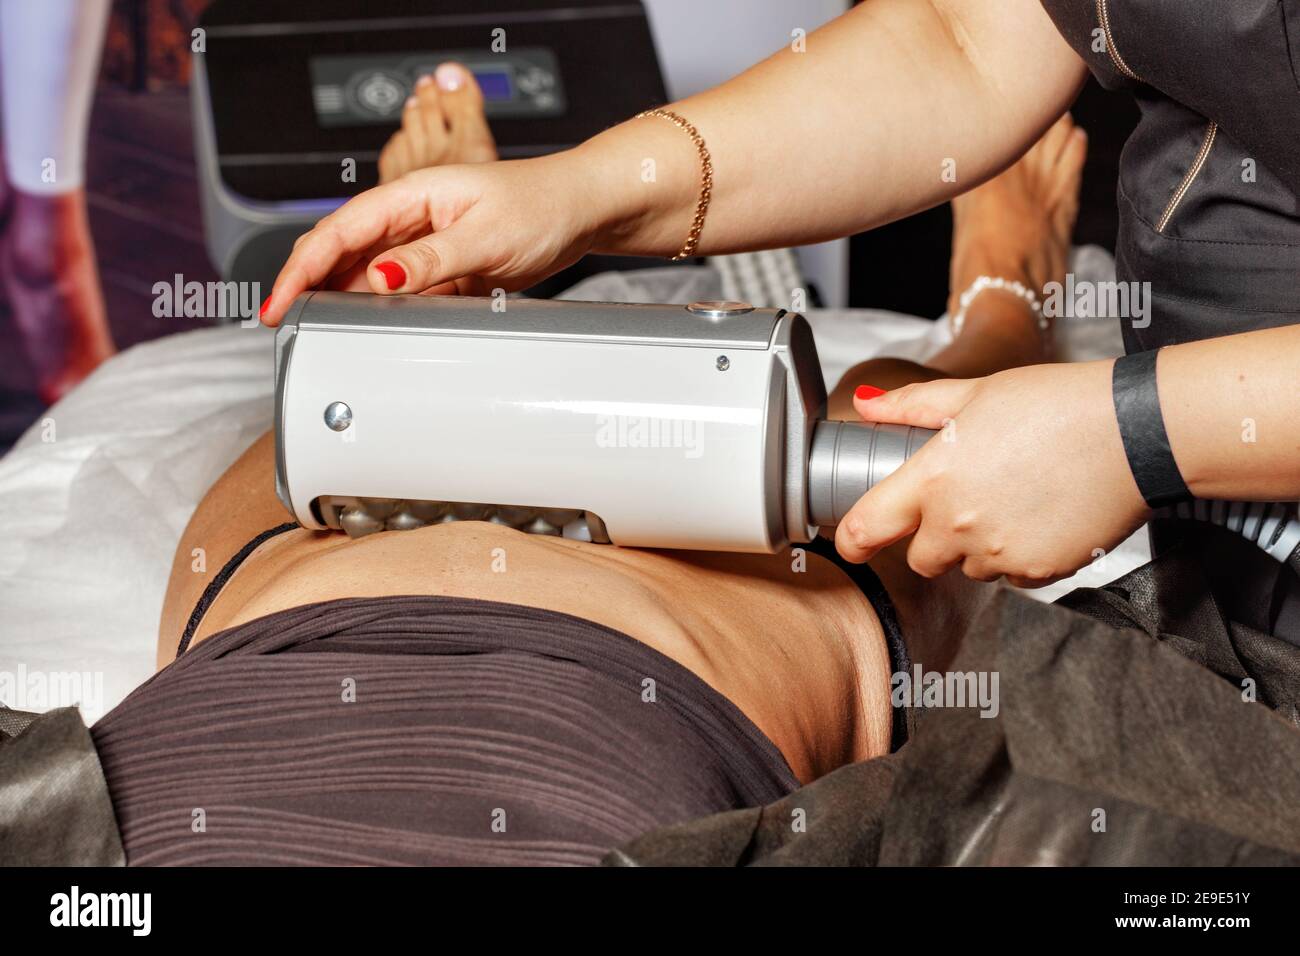 A professional cosmetologist performs an electromagnetic massage of the abdominal muscles on a woman patient on a high-intensity simulator. Stock Photo